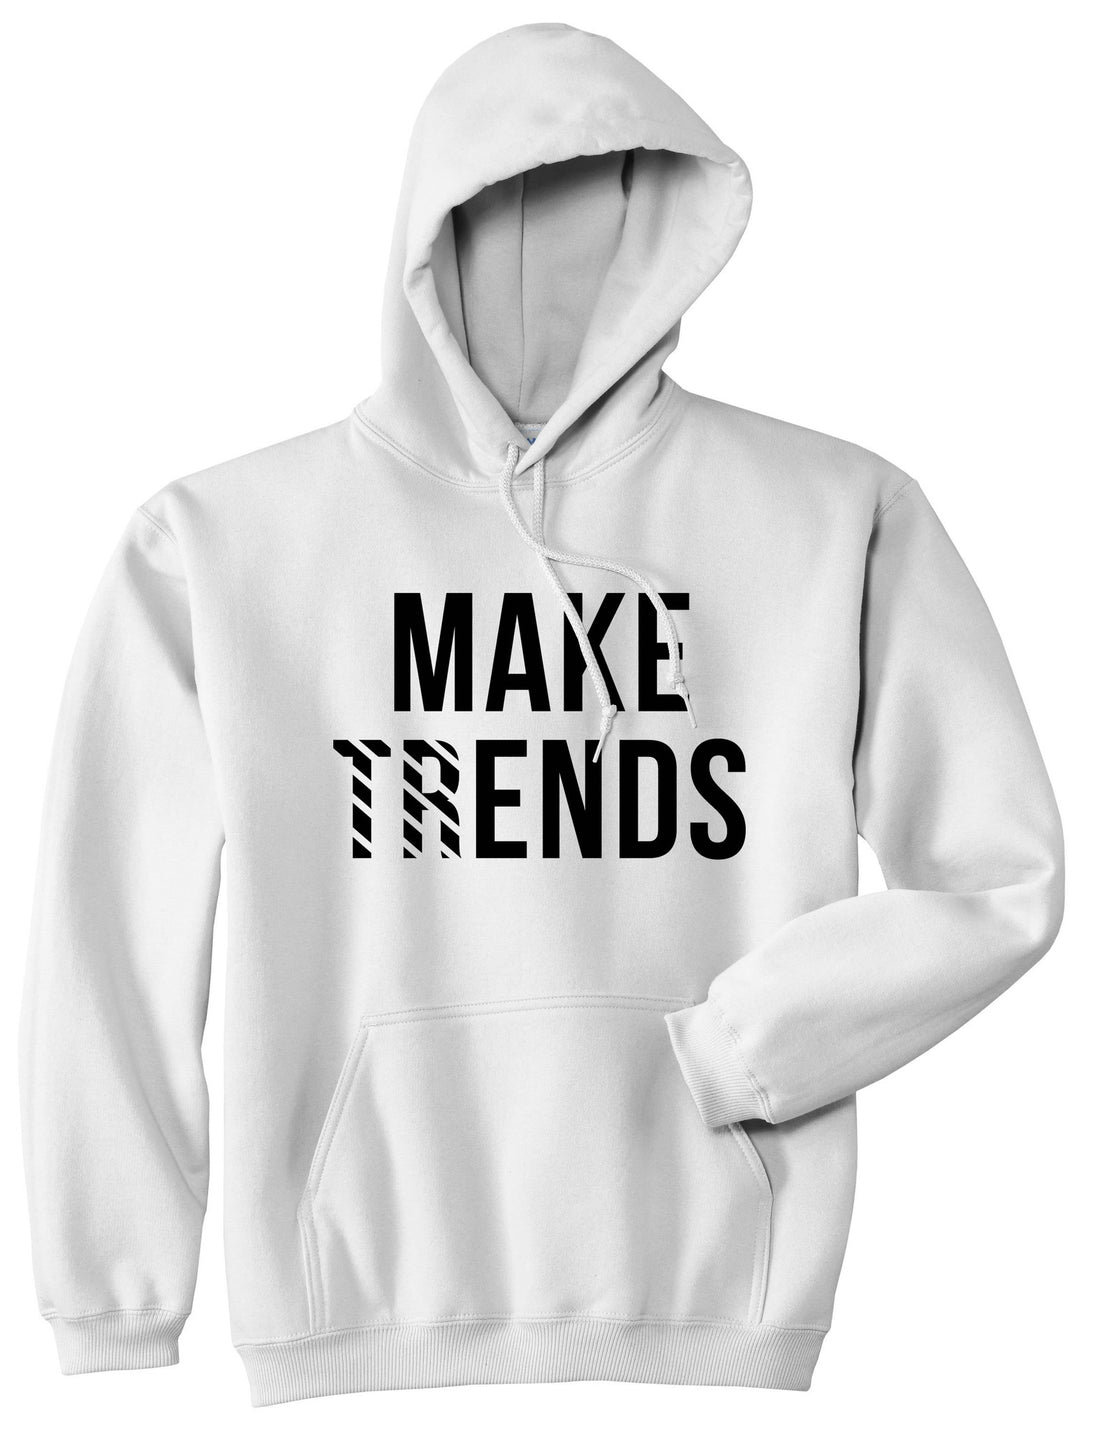 Make Trends Make Ends Pullover Hoodie Hoody in White by Kings Of NY